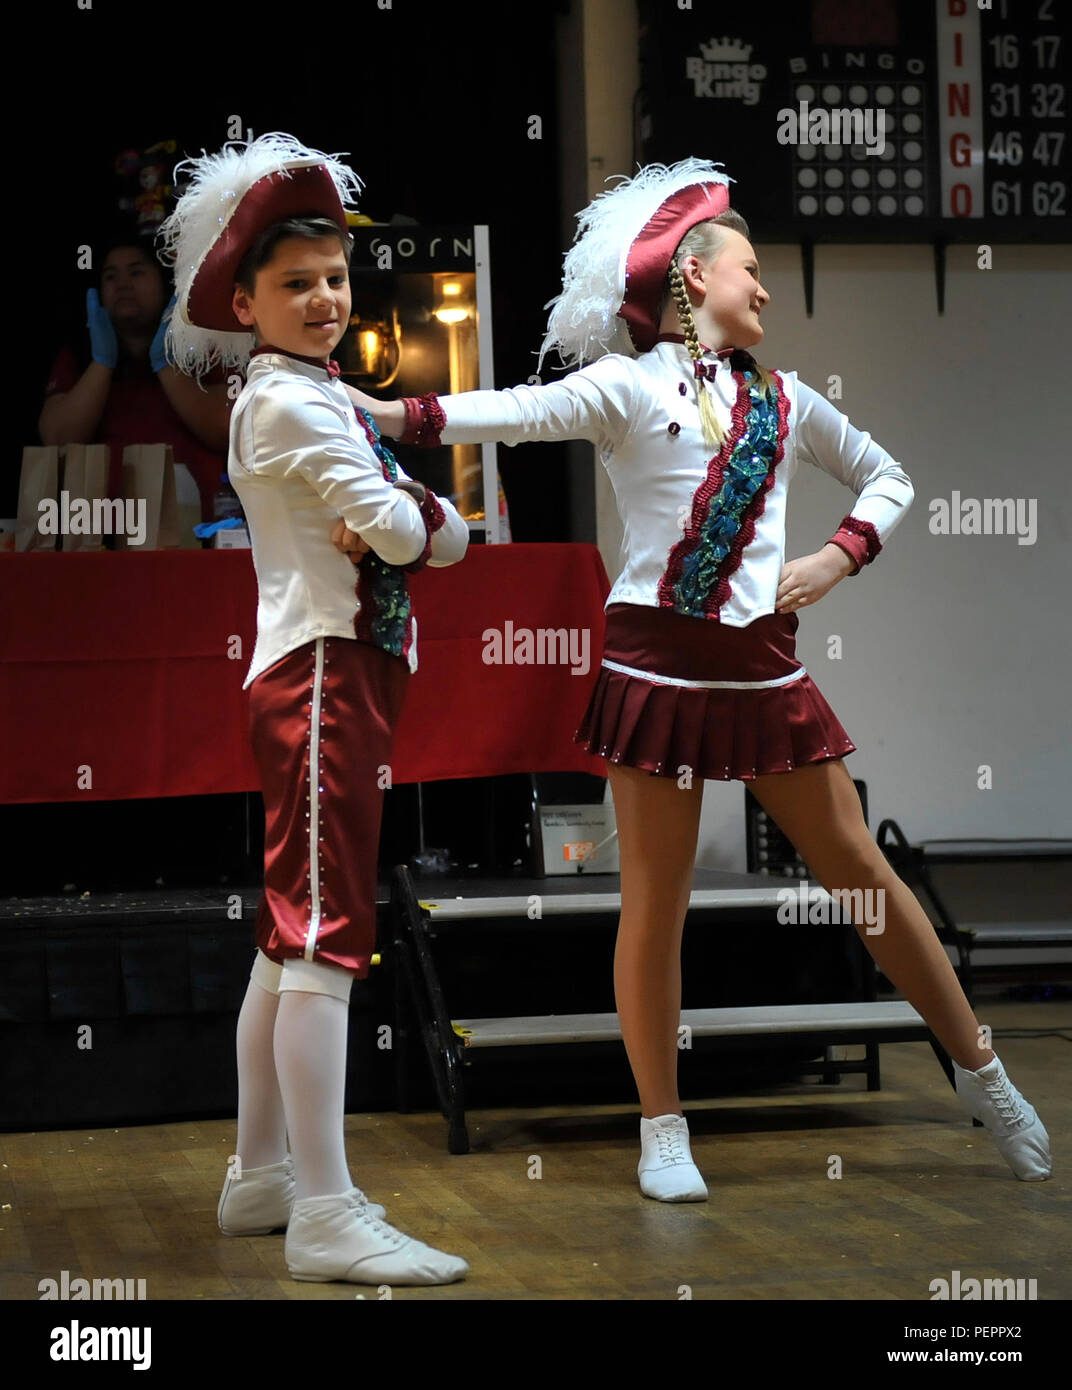 Mareike Schaumloeffel and Maris Schuler, a dance “tanzpaar,” or couple, perform a dance during a Kinder Fasching celebration Jan. 25, 2016, at Ramstein Air Base, Germany. The dance teams performed routines for a crowd to boost morale and excitement for upcoming Fasching parades. (U.S. Air Force photo/Airman 1st Class Larissa Greatwood) Stock Photo